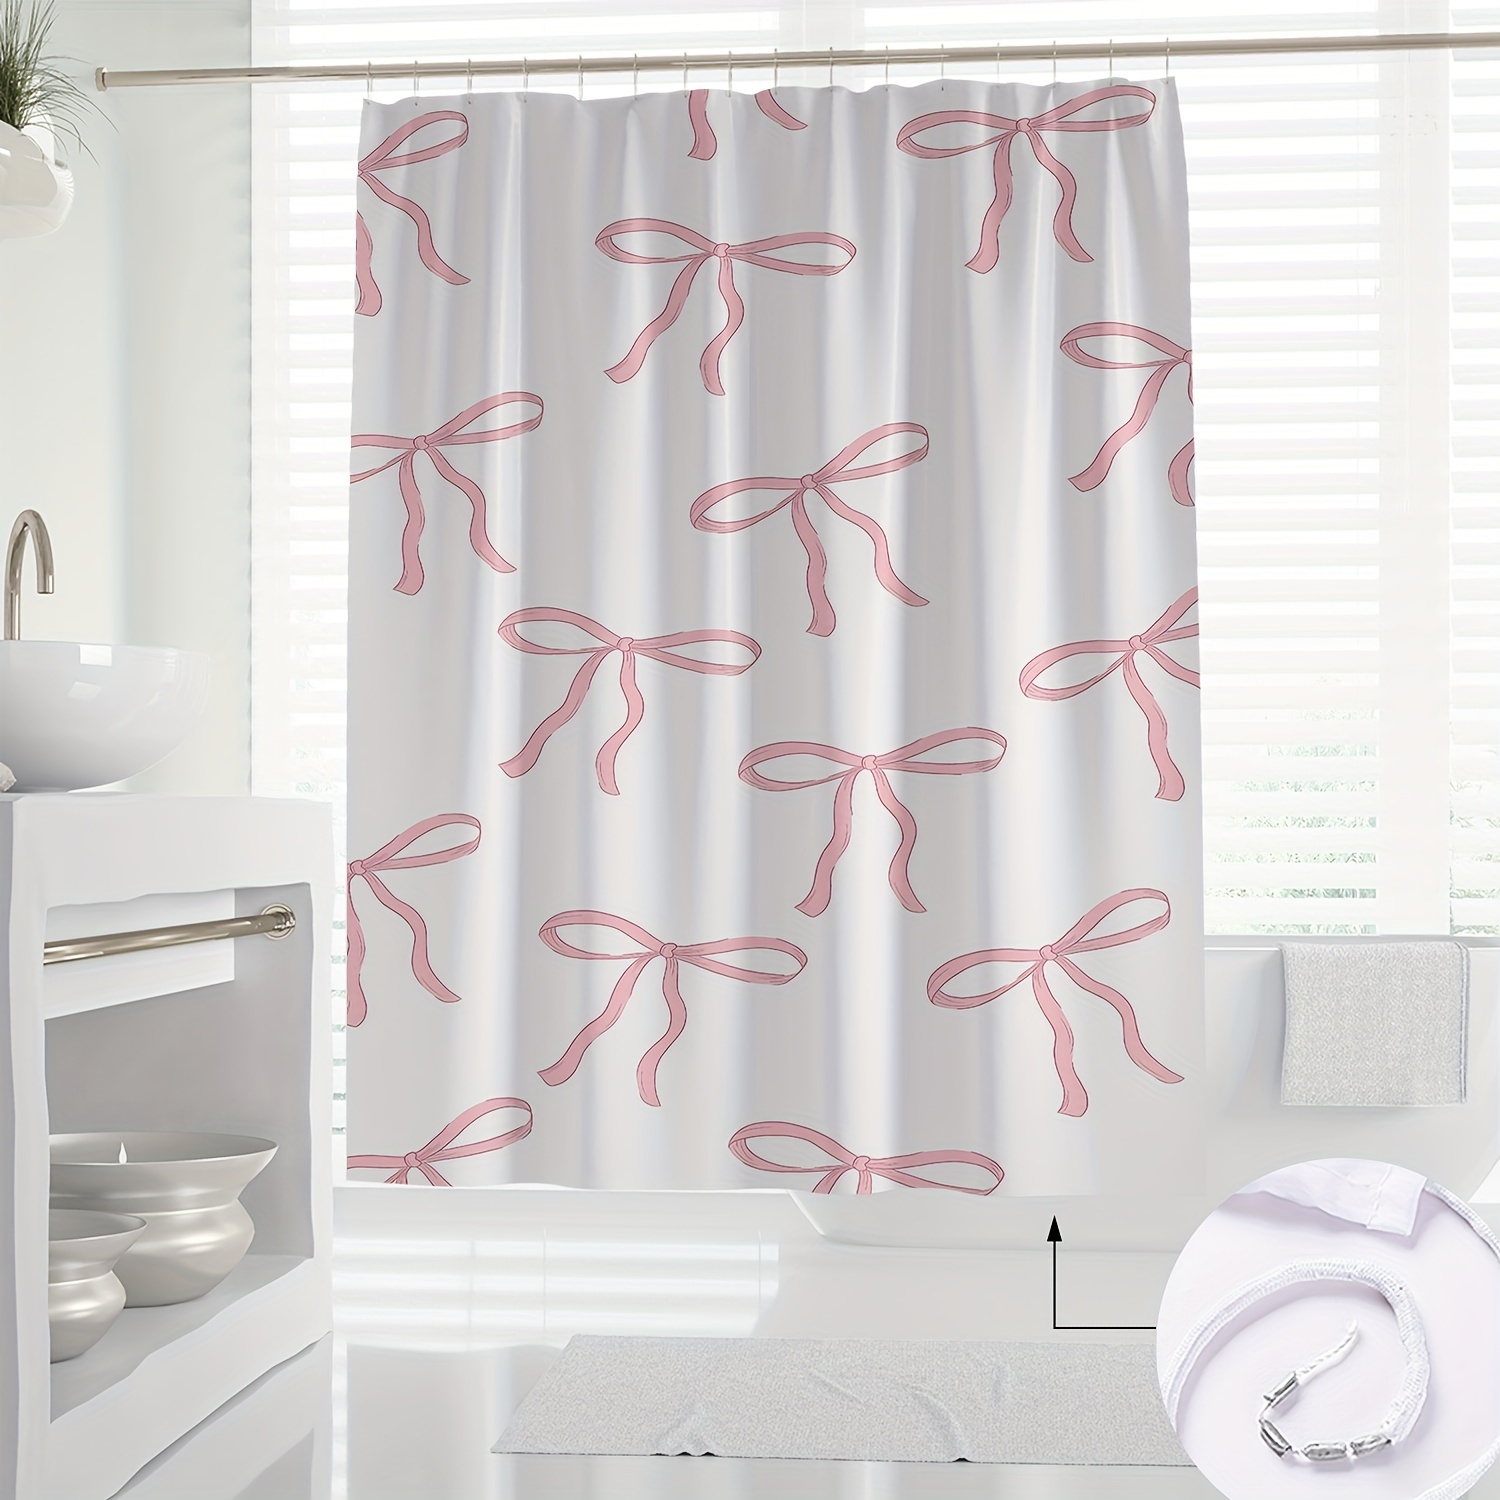 

Chic Pink Bowknot & Ribbon Print Shower Curtain - Waterproof, Machine Washable With Hooks Included - Perfect For All Seasons Bathroom Decor